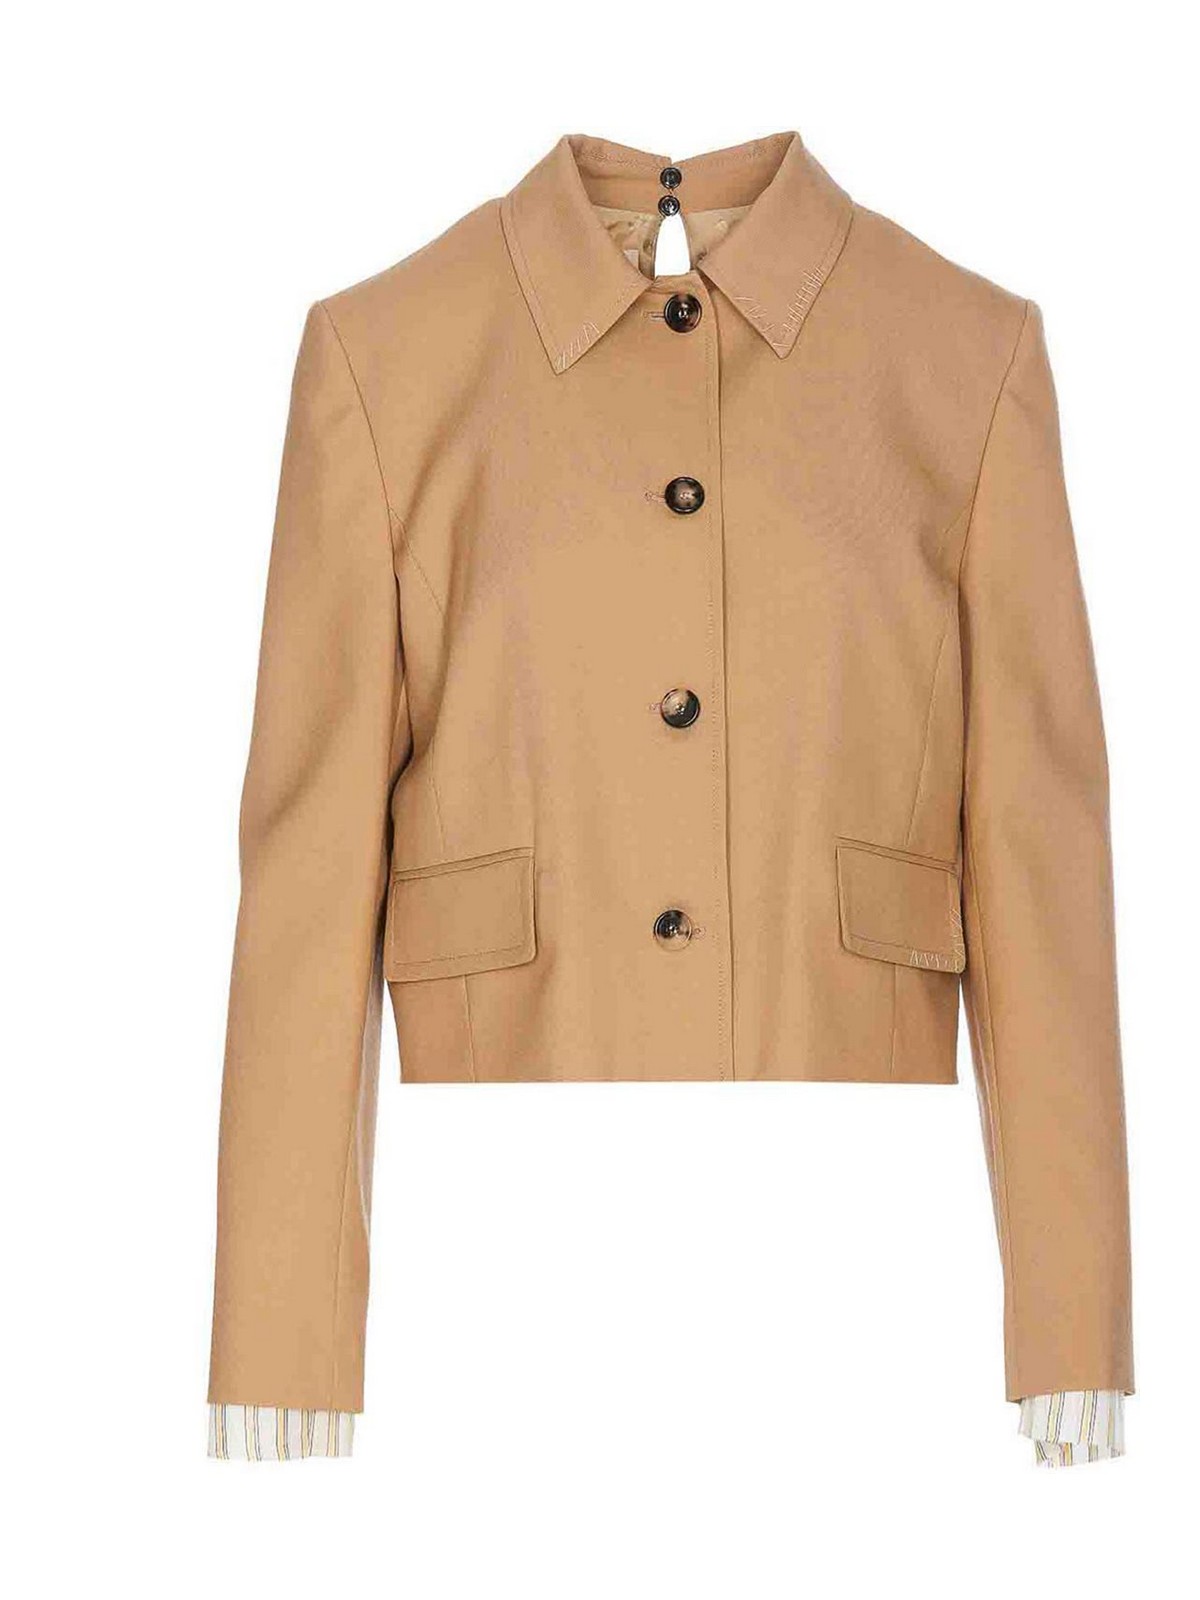 Marni Beige Jacket Frontal Buttons